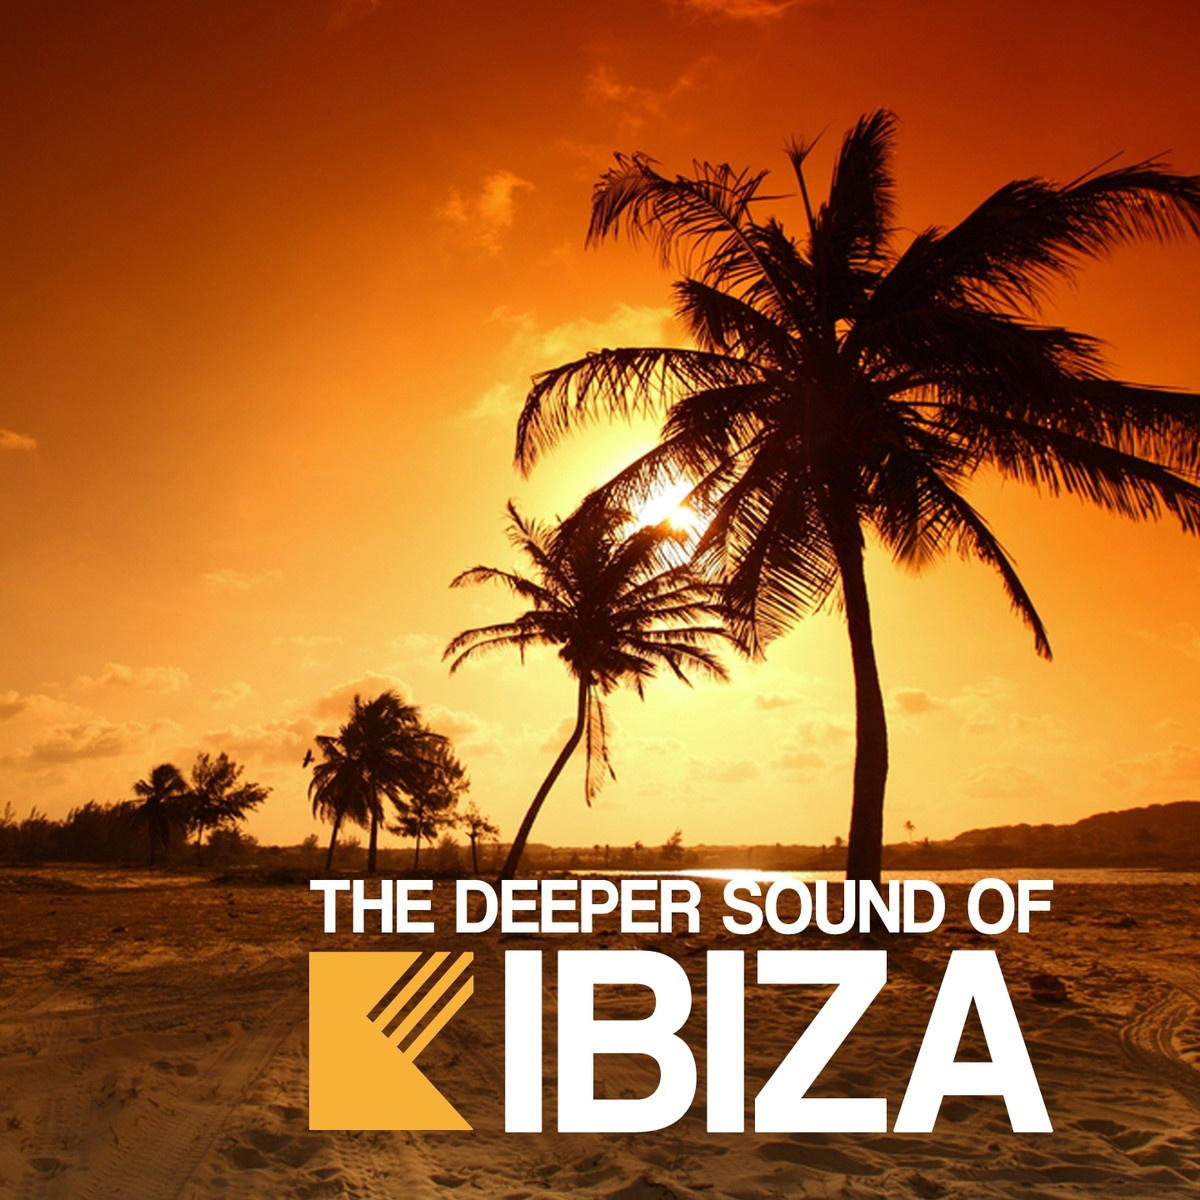 The Deeper Sound of Ibiza